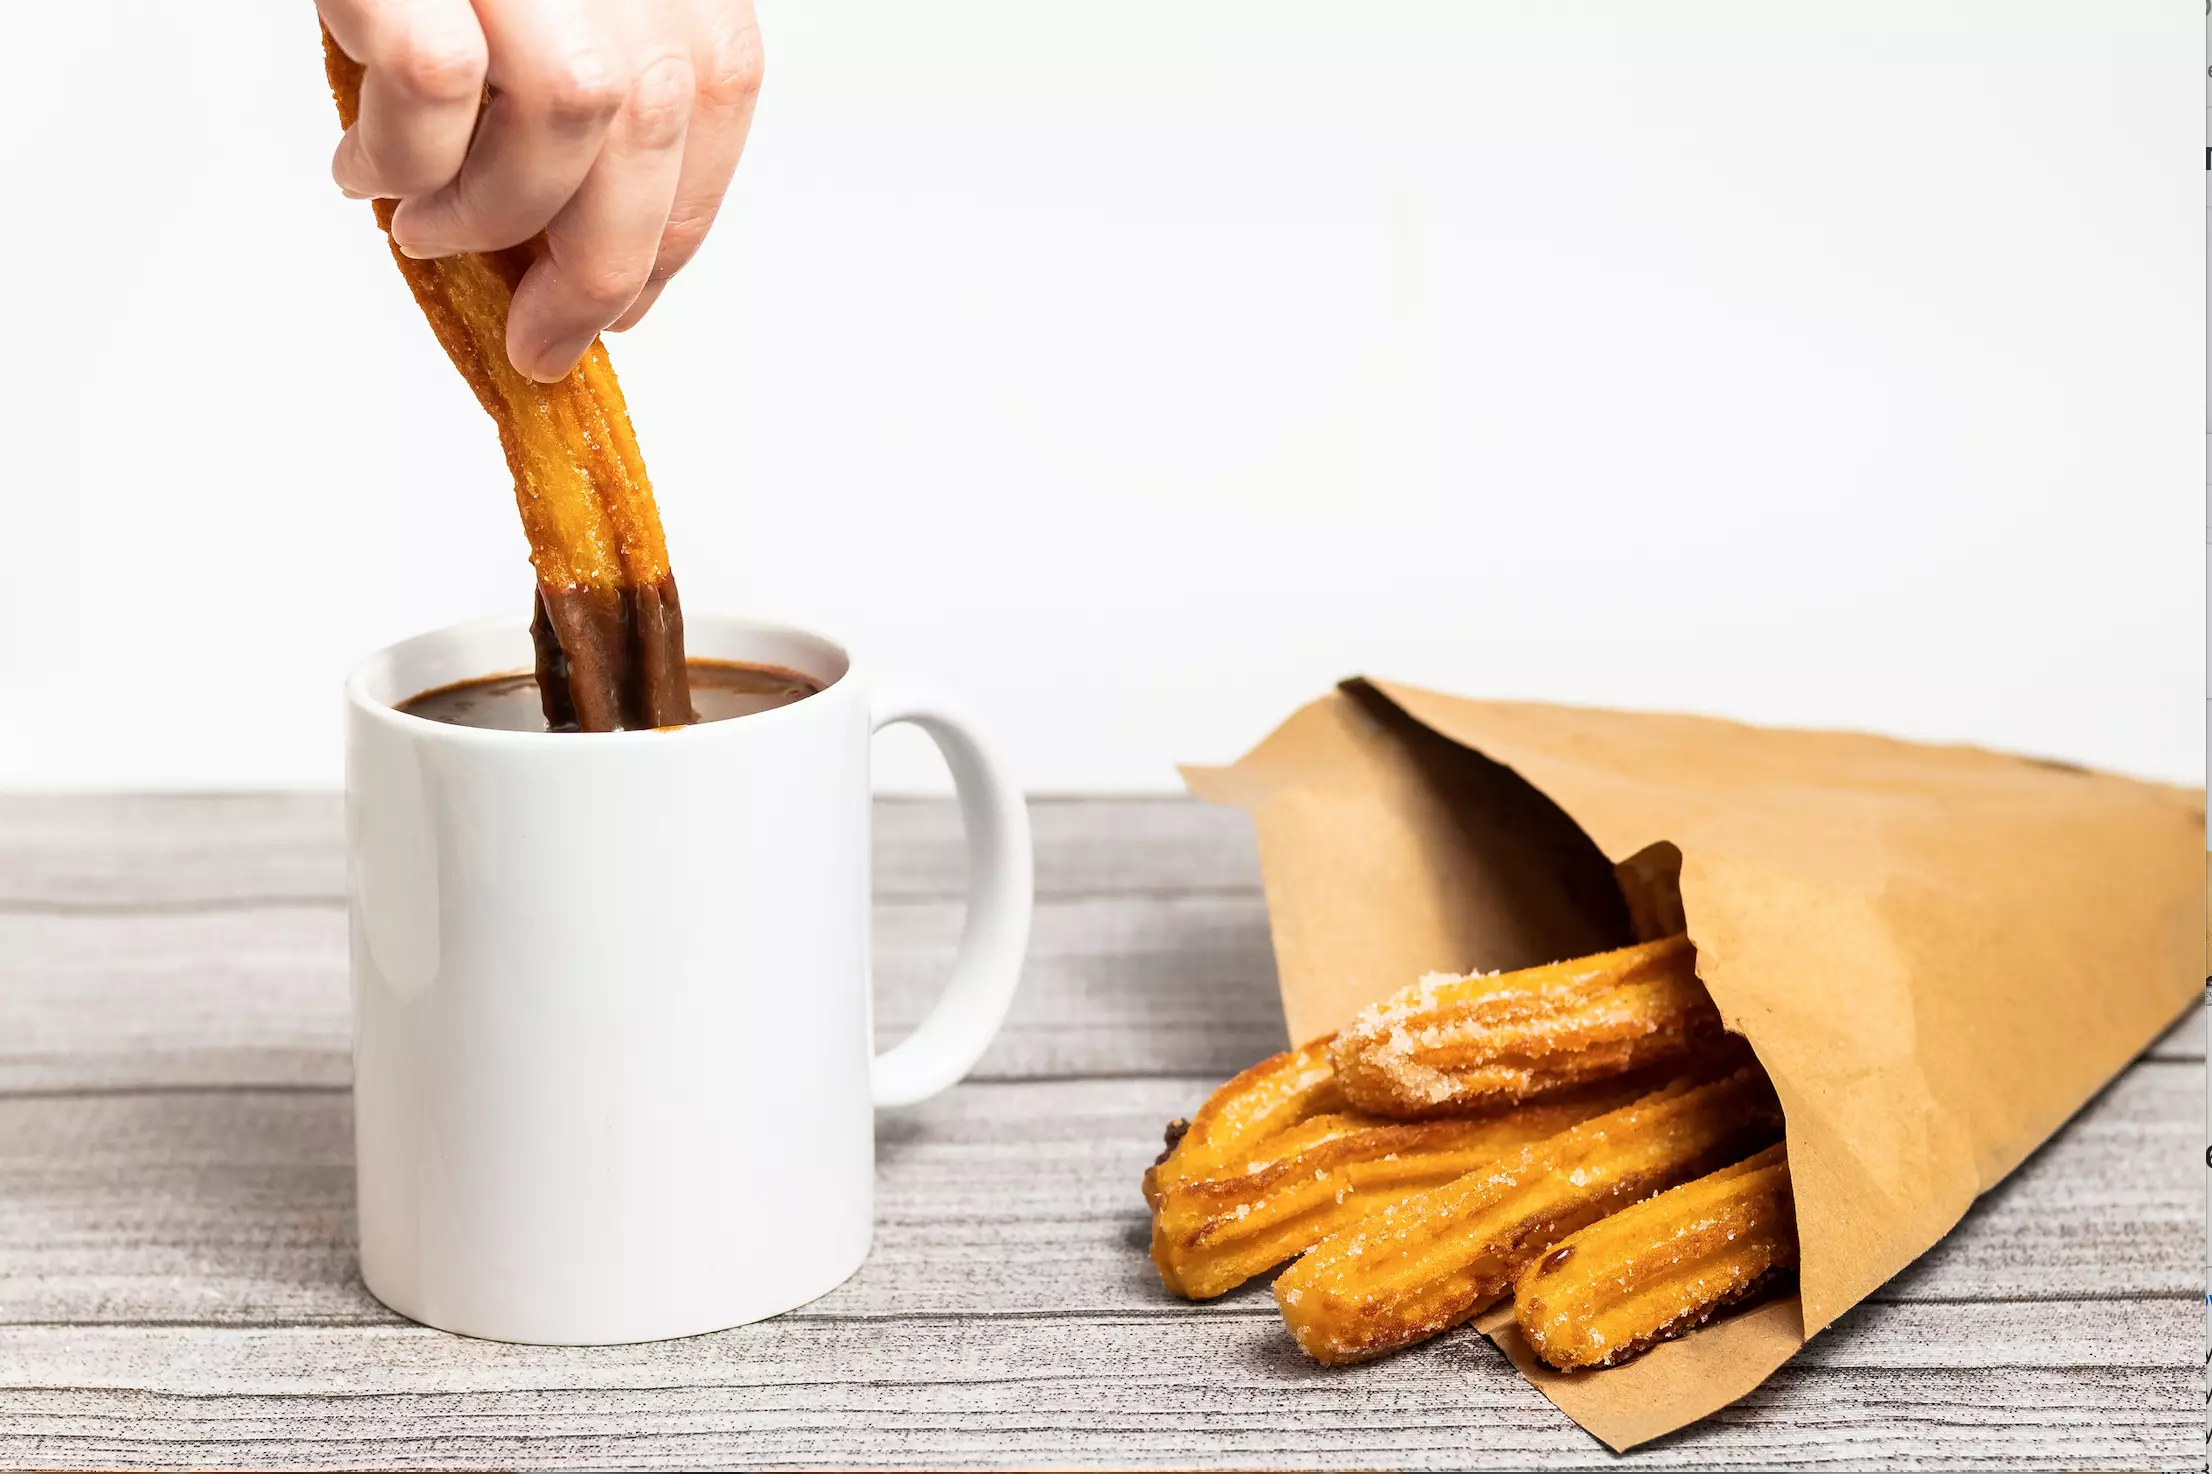 The churros maker is returning in time for pancake day (